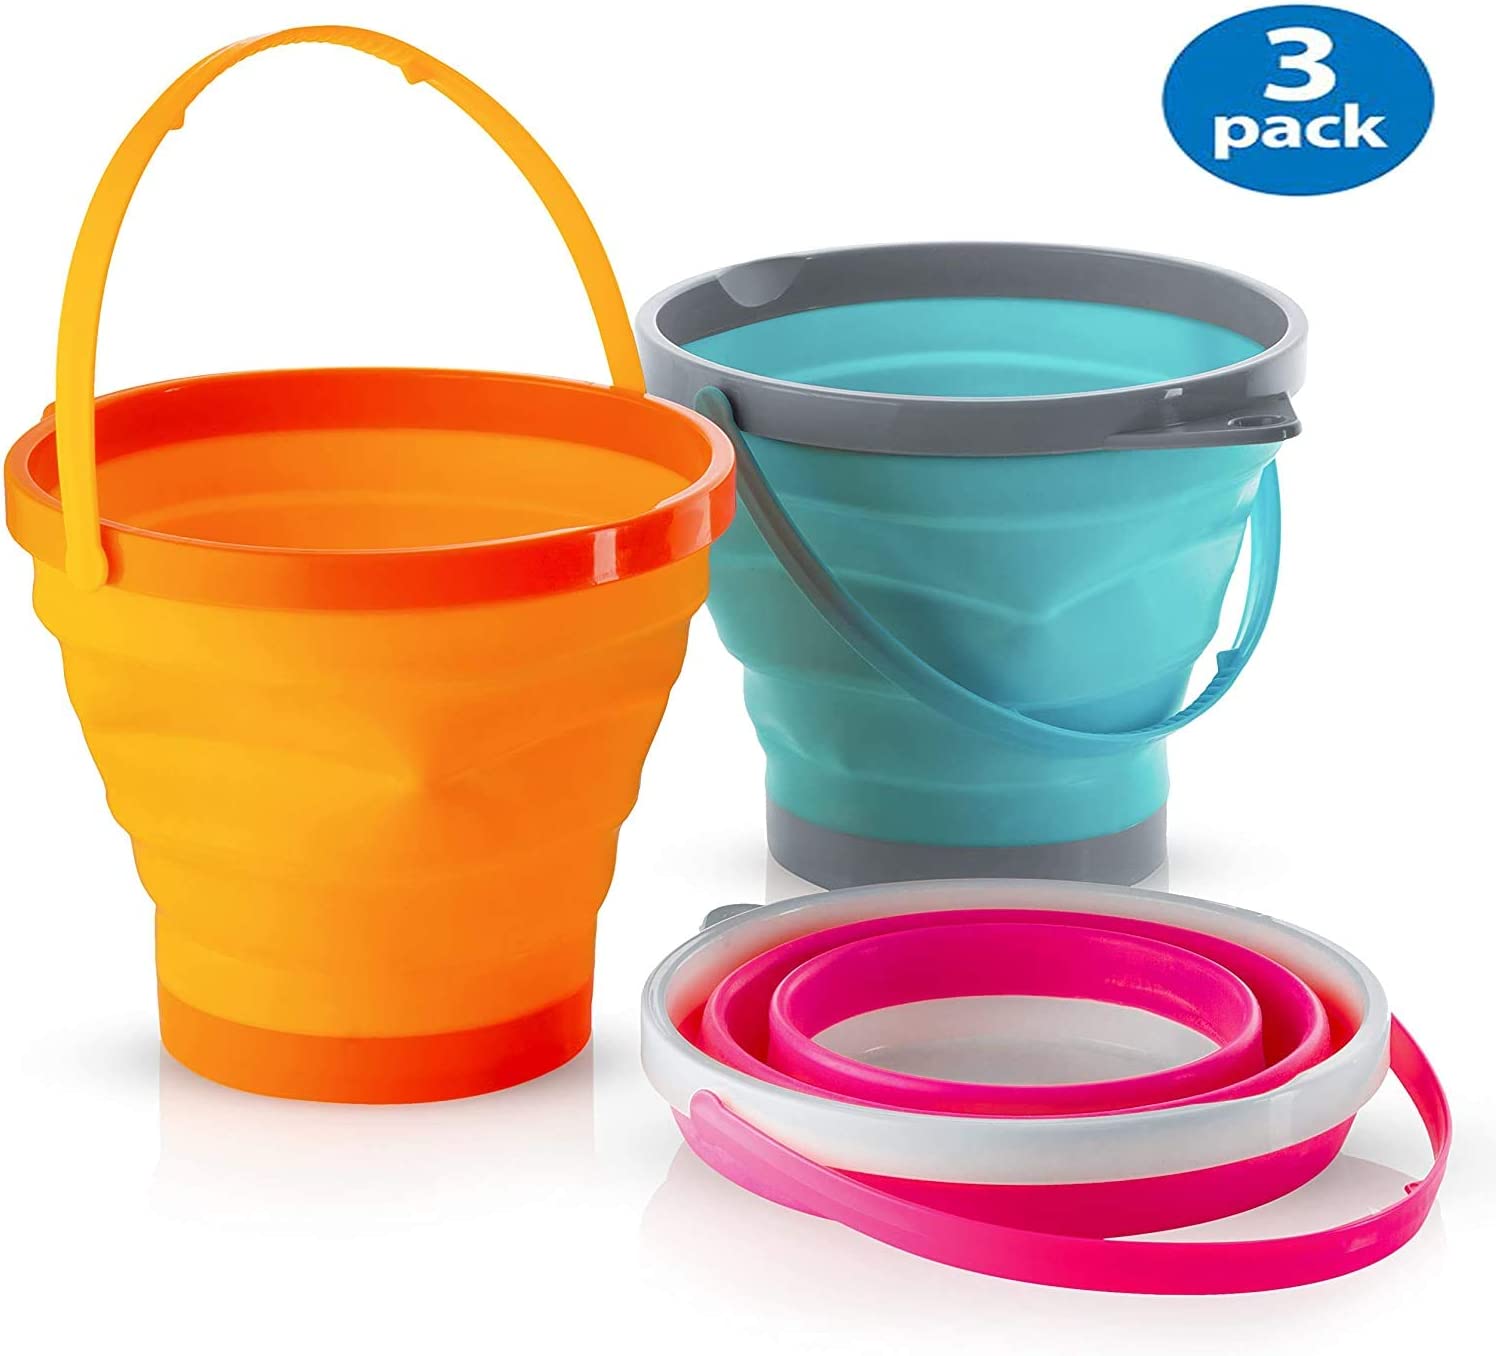 Large Foldable Pail Bucket Collapsible Buckets Multi Purpose For Beach, Camping Gear